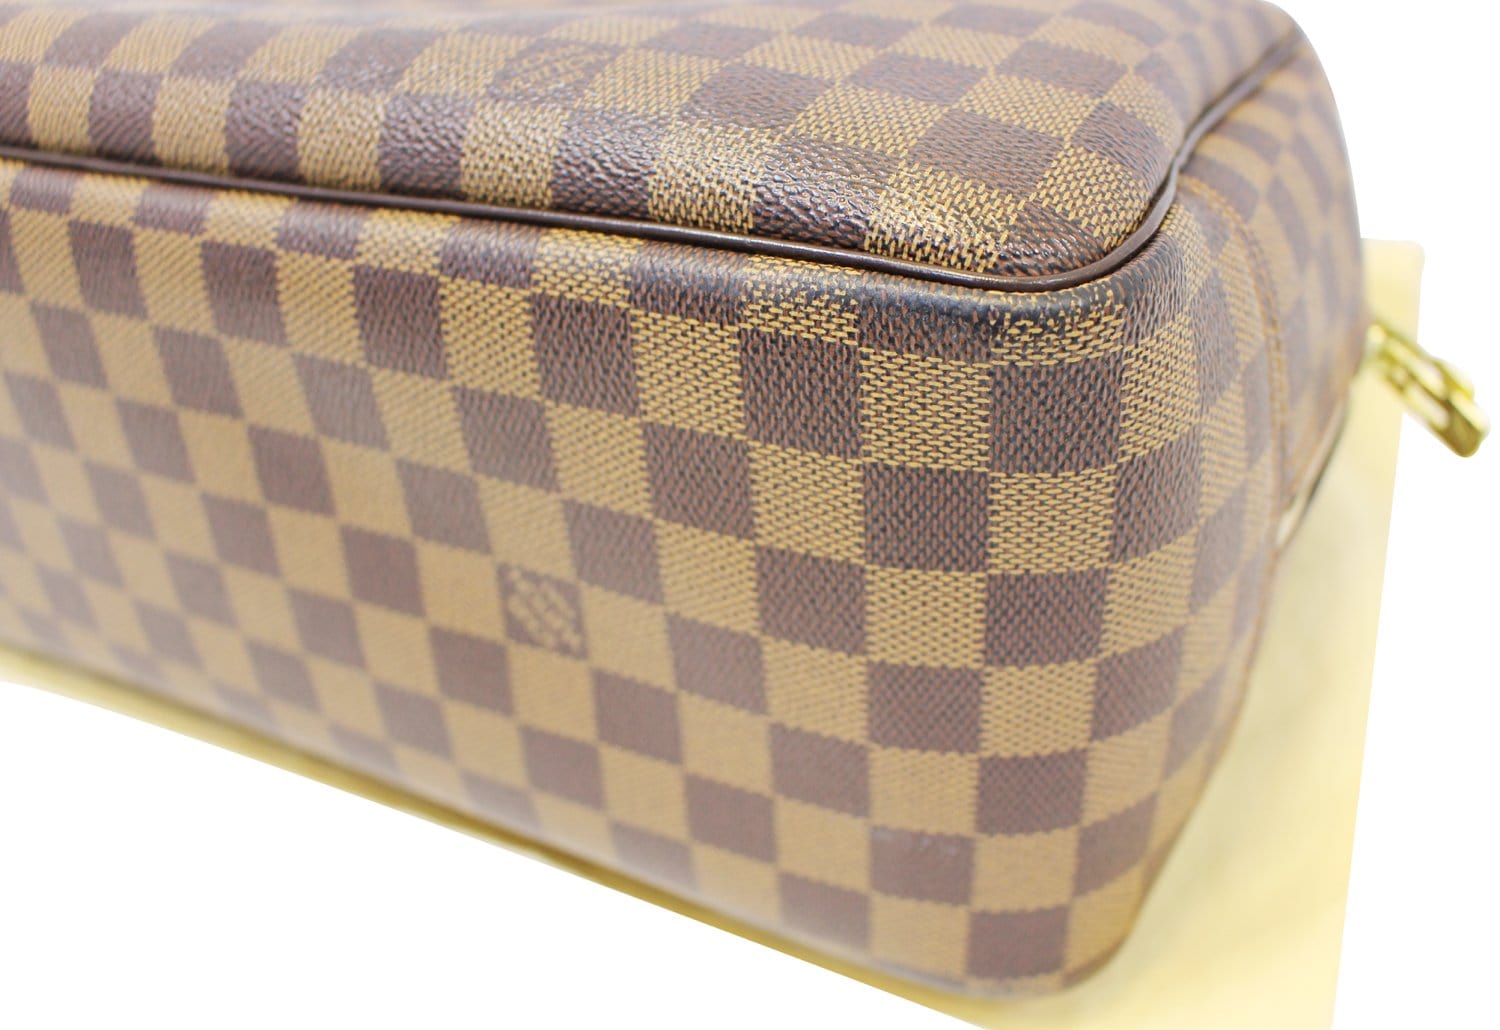 Louis Vuitton - Deauville Neverfull bag, Limited Edition